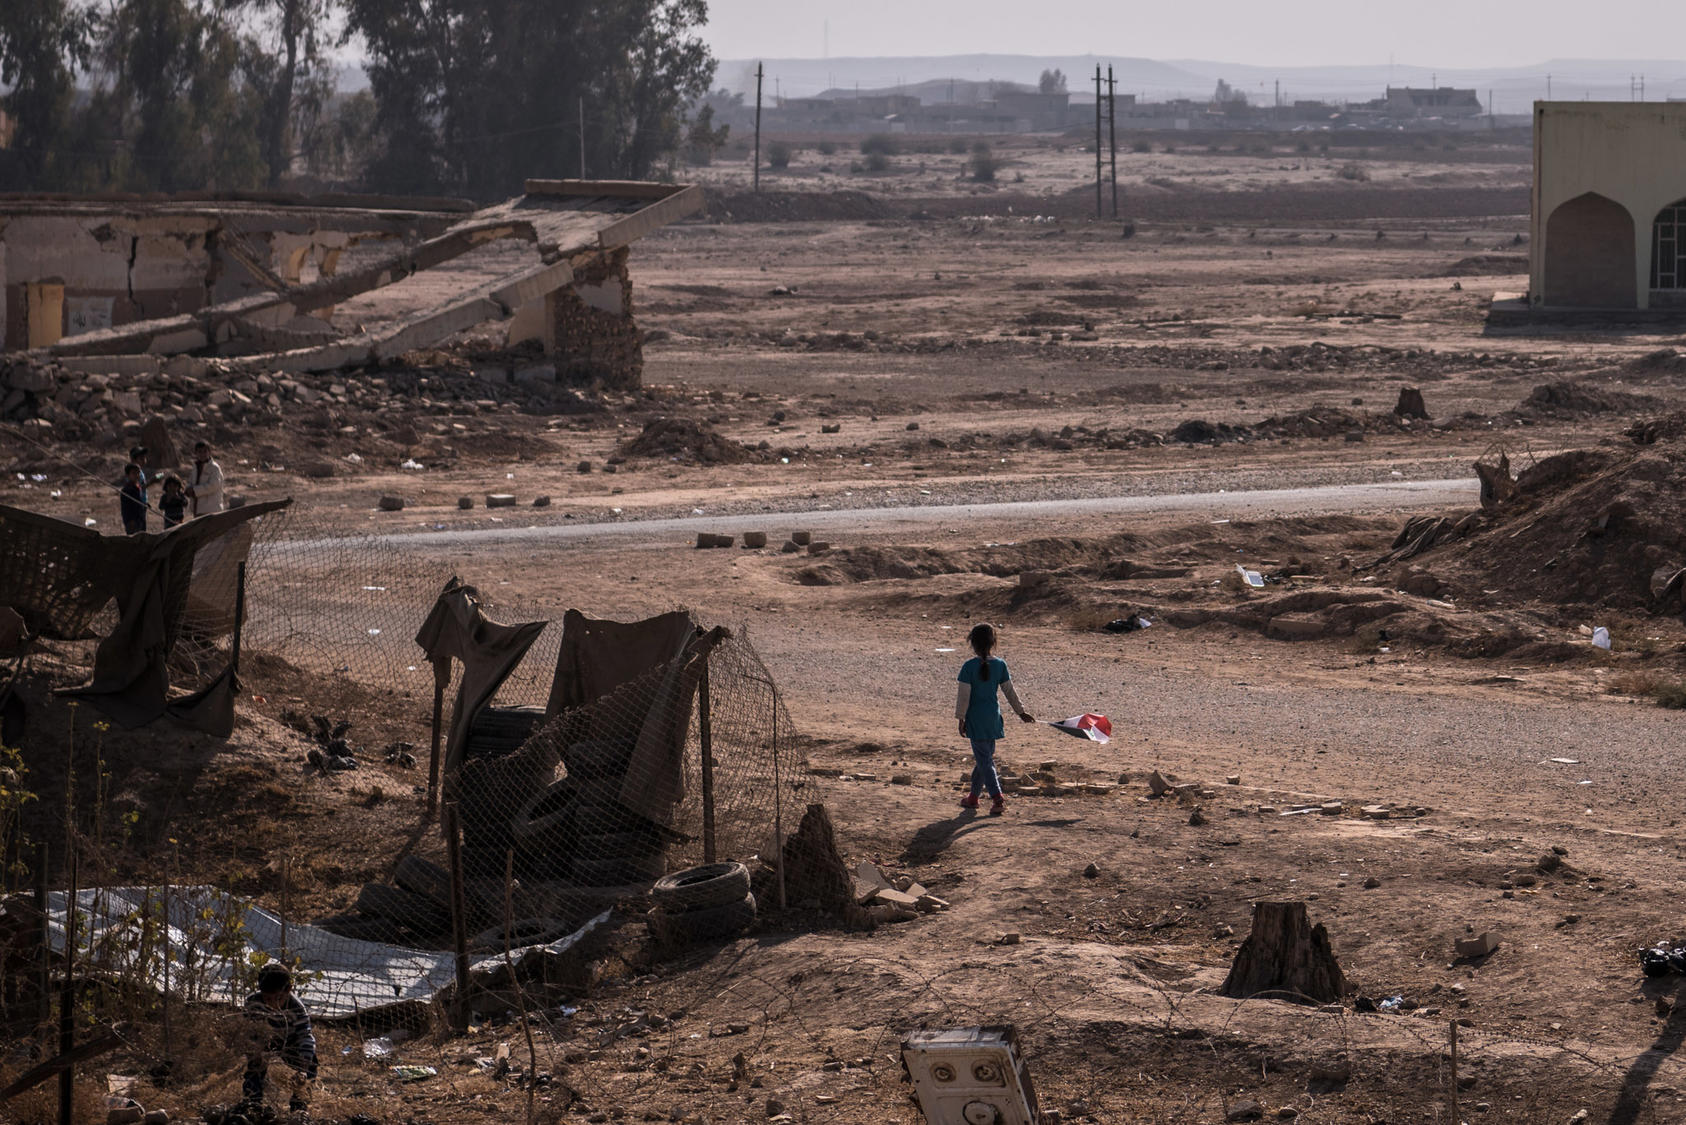 A girl with an Iraqi flag walks near her home in Qayyara, Iraq, Nov. 12, 2016. The military campaign to retake Mosul, Iraq’s second-largest city, has displaced nearly 70,000 Iraqis. More civilians than ever are taking the risk of evacuation, hoping to find help if they can make it past the militants’ gun range. (Sergey Ponomarev/The New York Times)